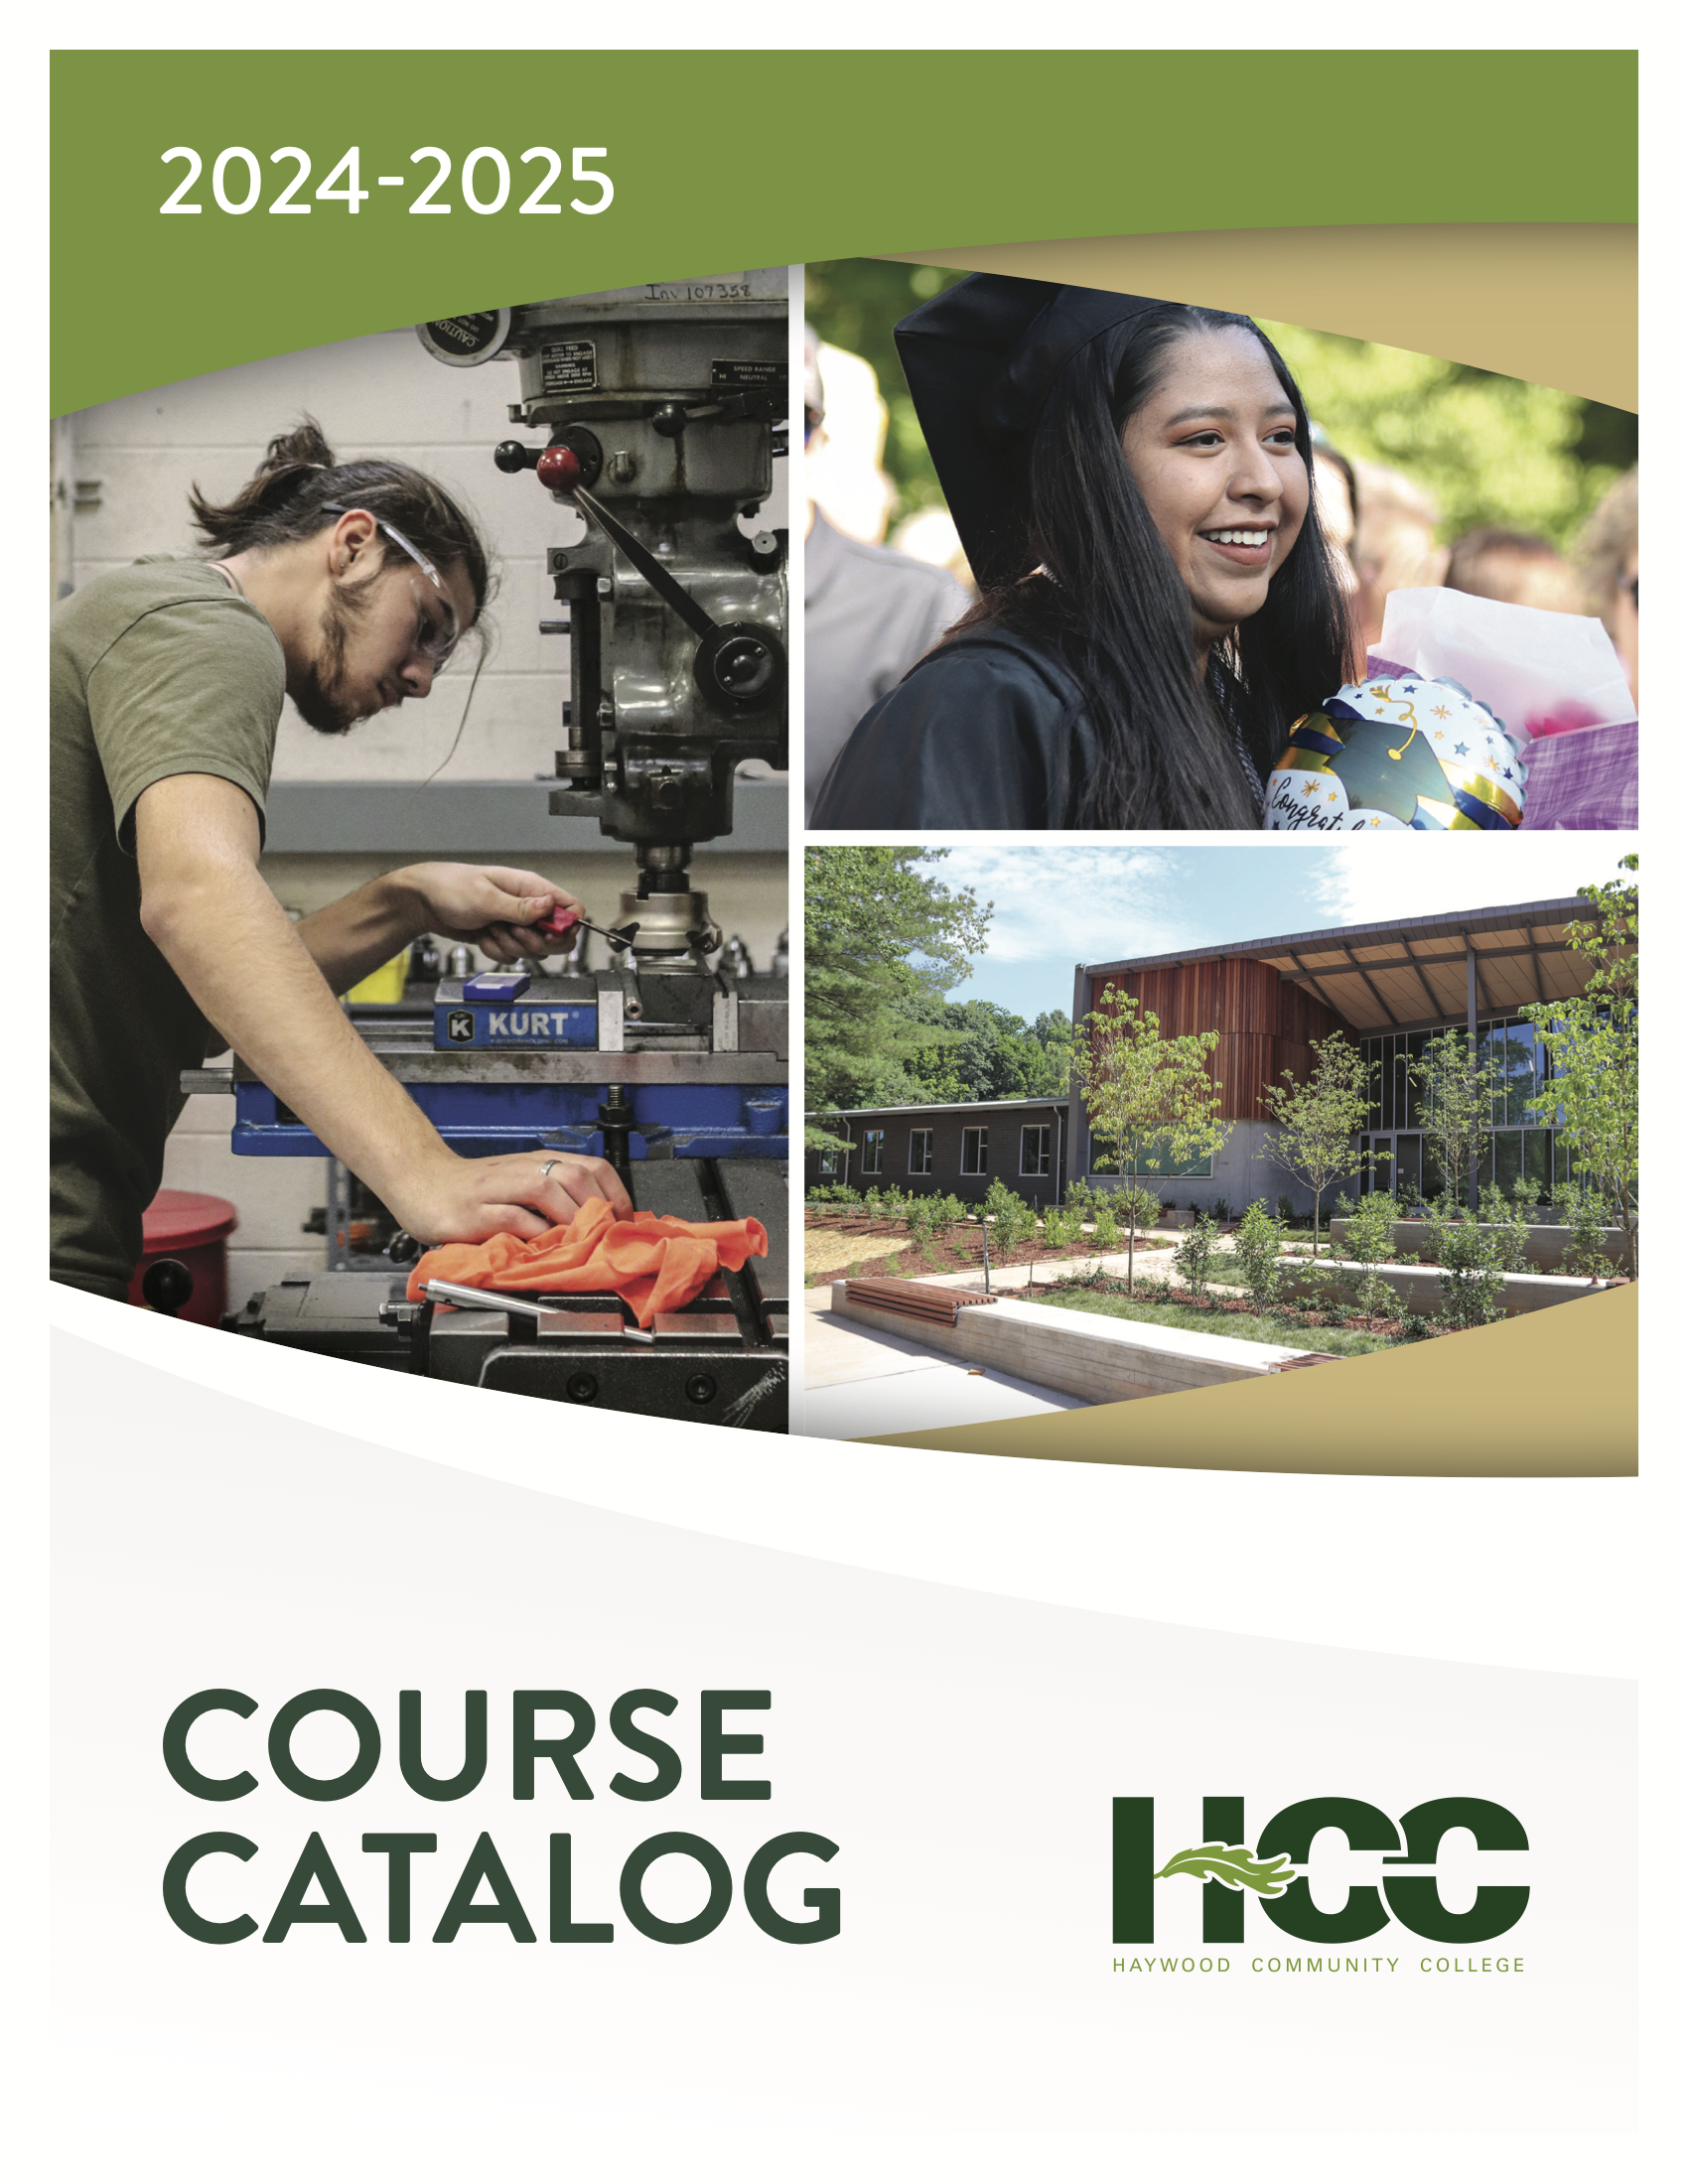 2024-2025 Course Catalog for Haywood Community College, cover images of a student working on machinery, a student in graduation robes, and the front entrance of a building on campus.